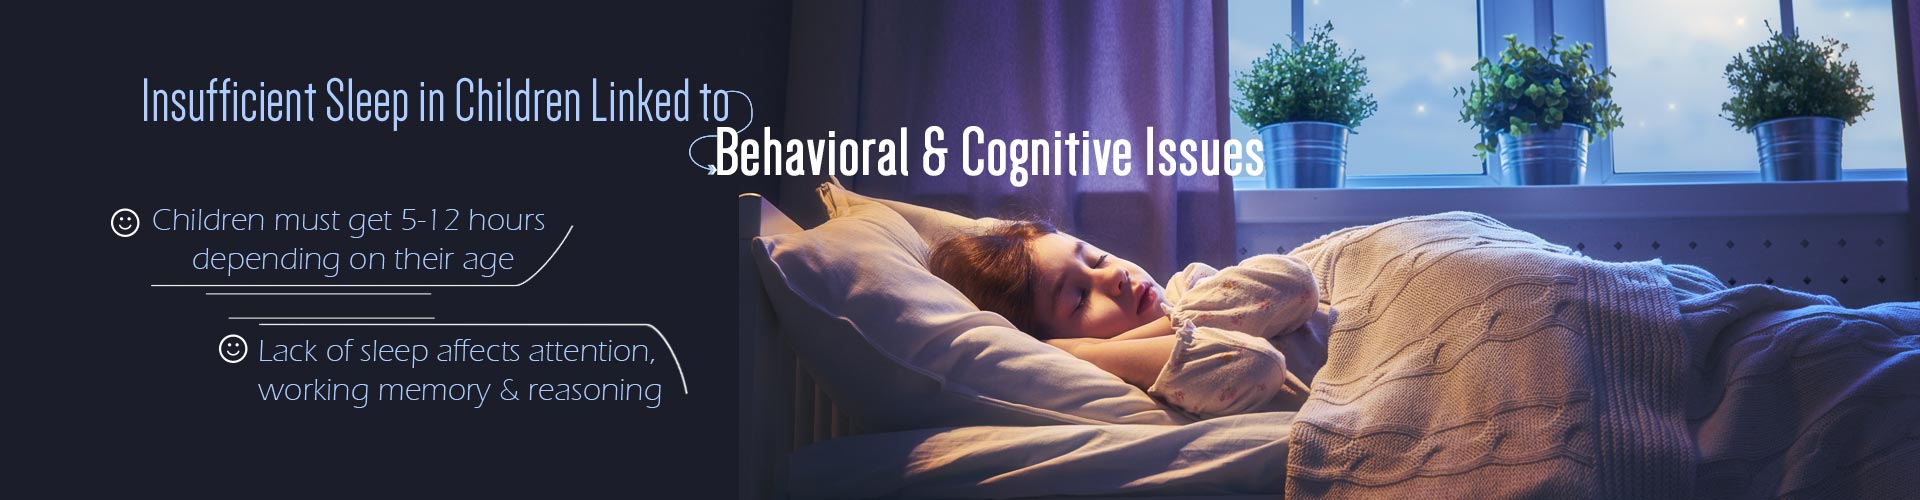 Insufficient Sleep in Children Linked to Behavioral & Cognitive Issues
- Children must get 5-12 hours depending on their age
- Lack of sleep affects attention, working memory & reasoning